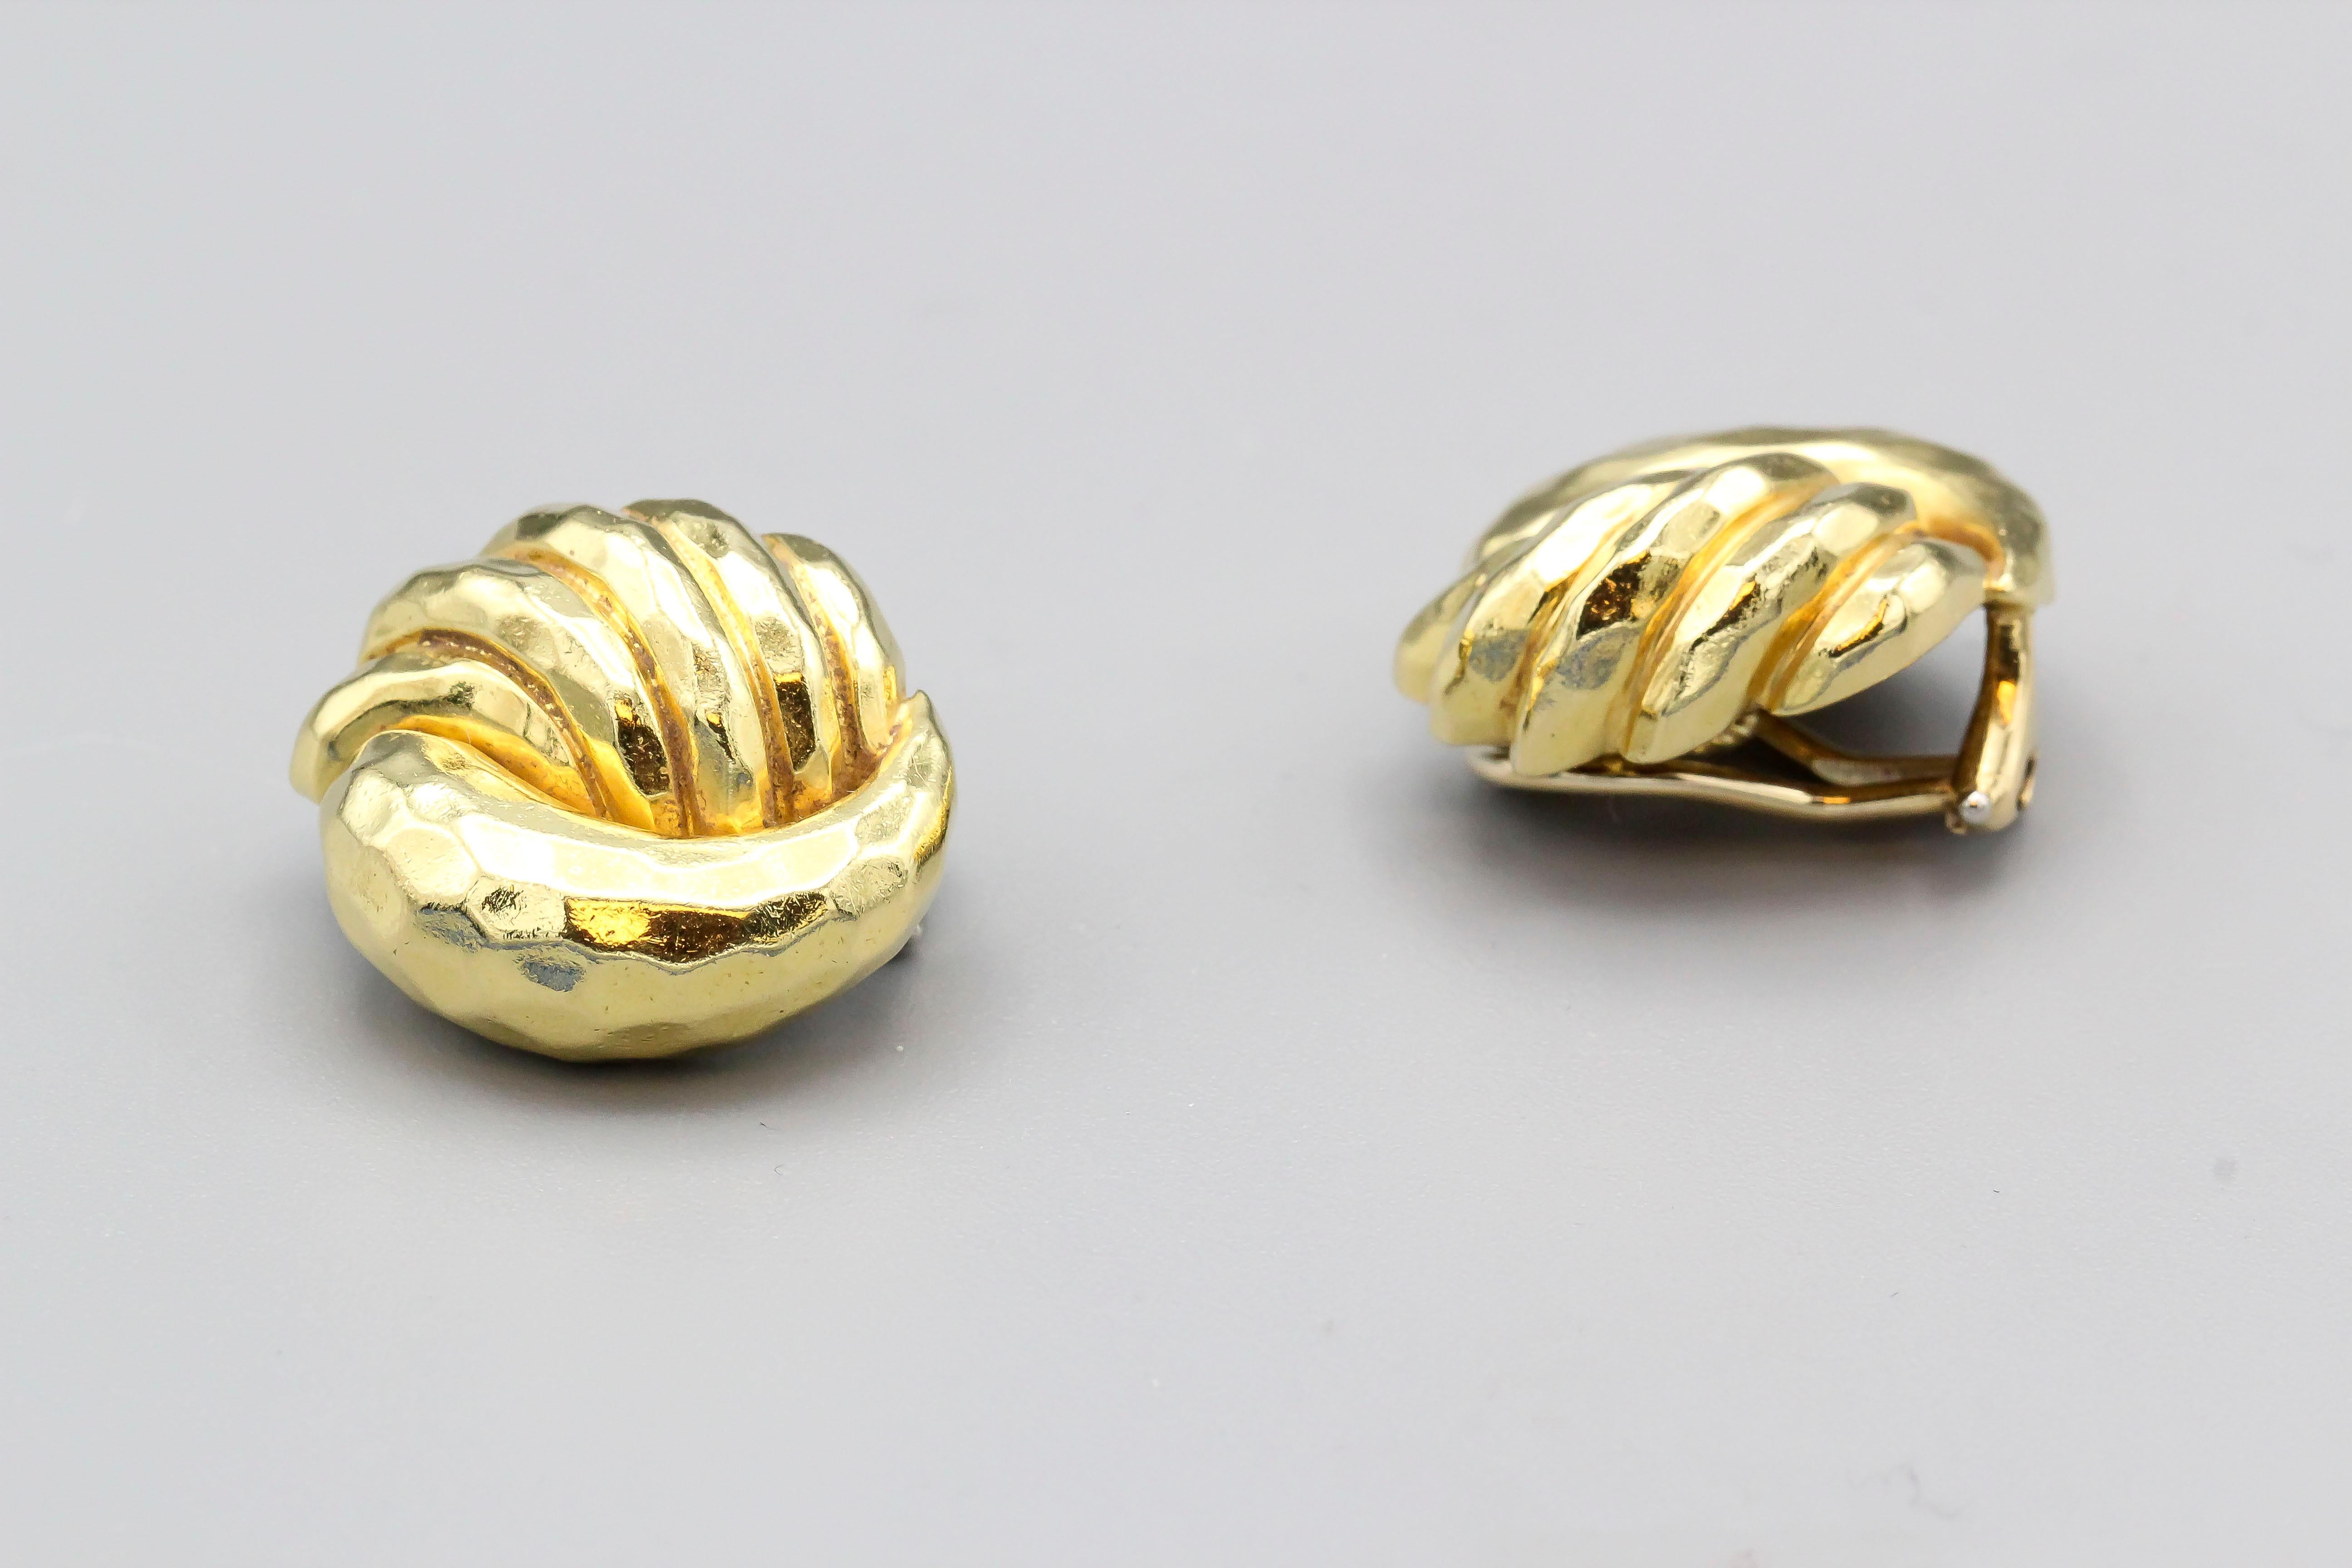 Fine pair of hammered 18K gold oval ear clips by Henry Dunay.  They feature a modern dome-like design, and are of a substantial 22 grams in weight.

Hallmarks: Dunay 18k(C), reference numbers.